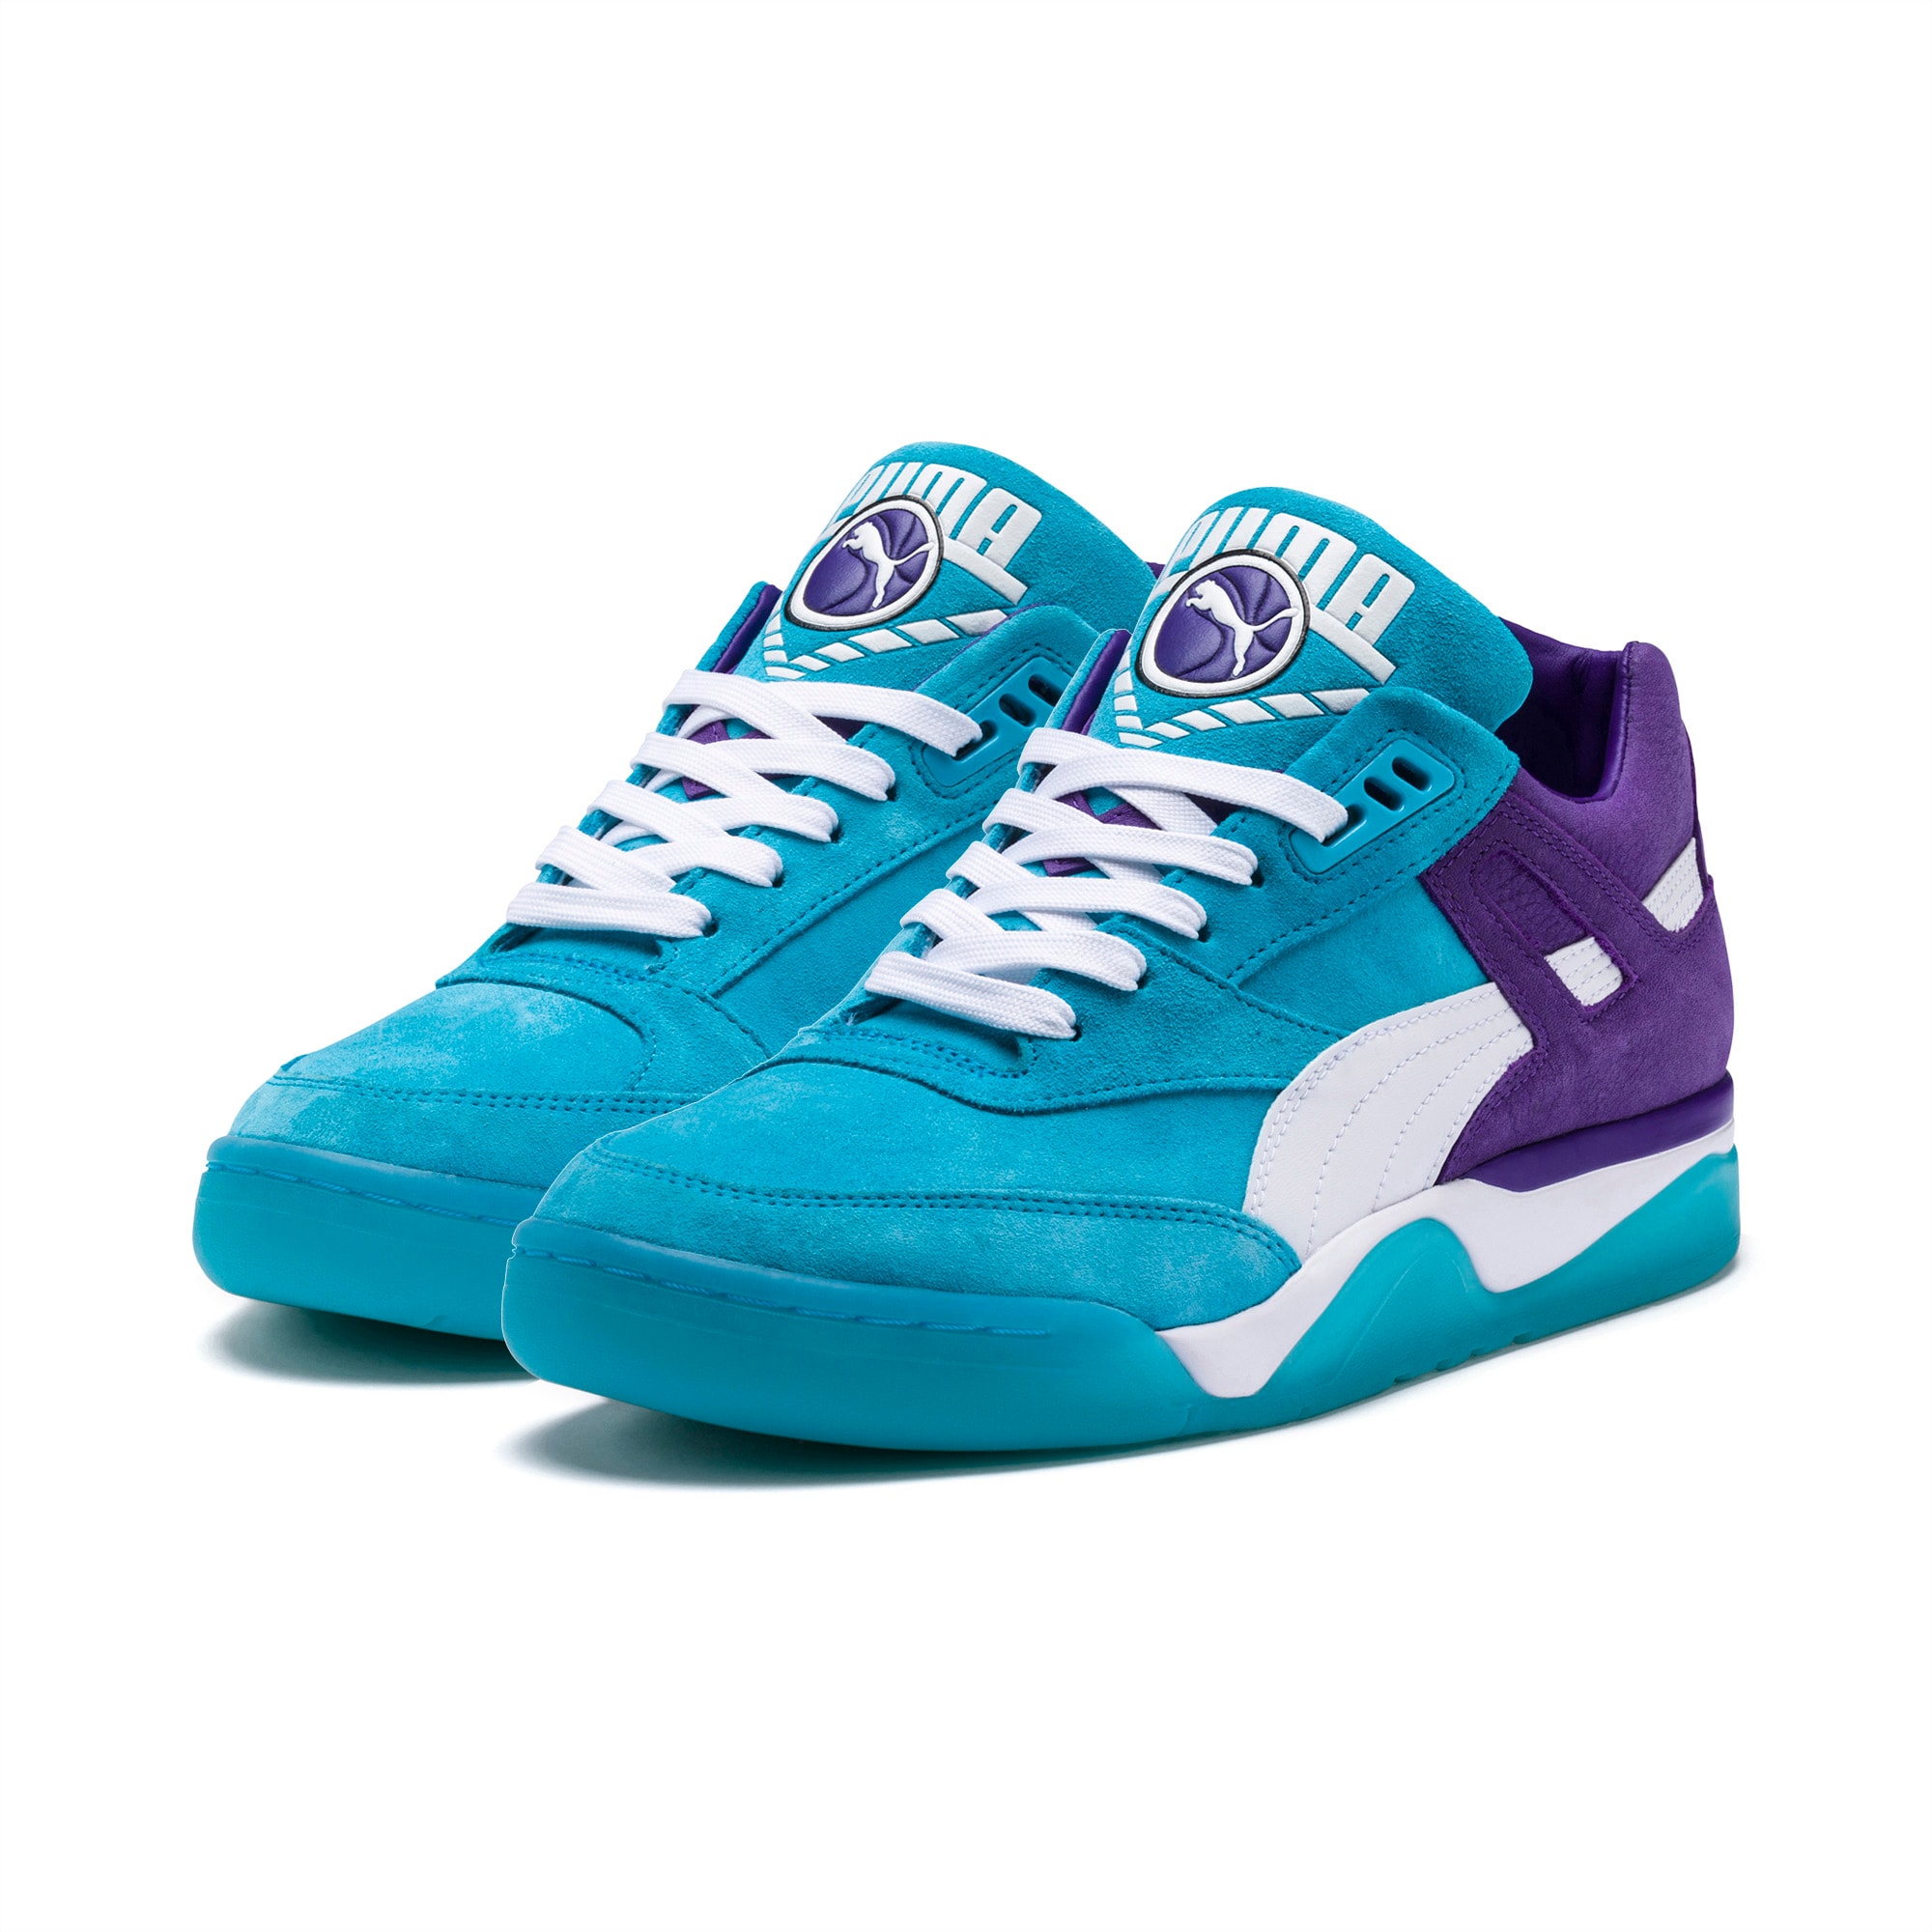 Palace Guard Queen City Trainers | PUMA 